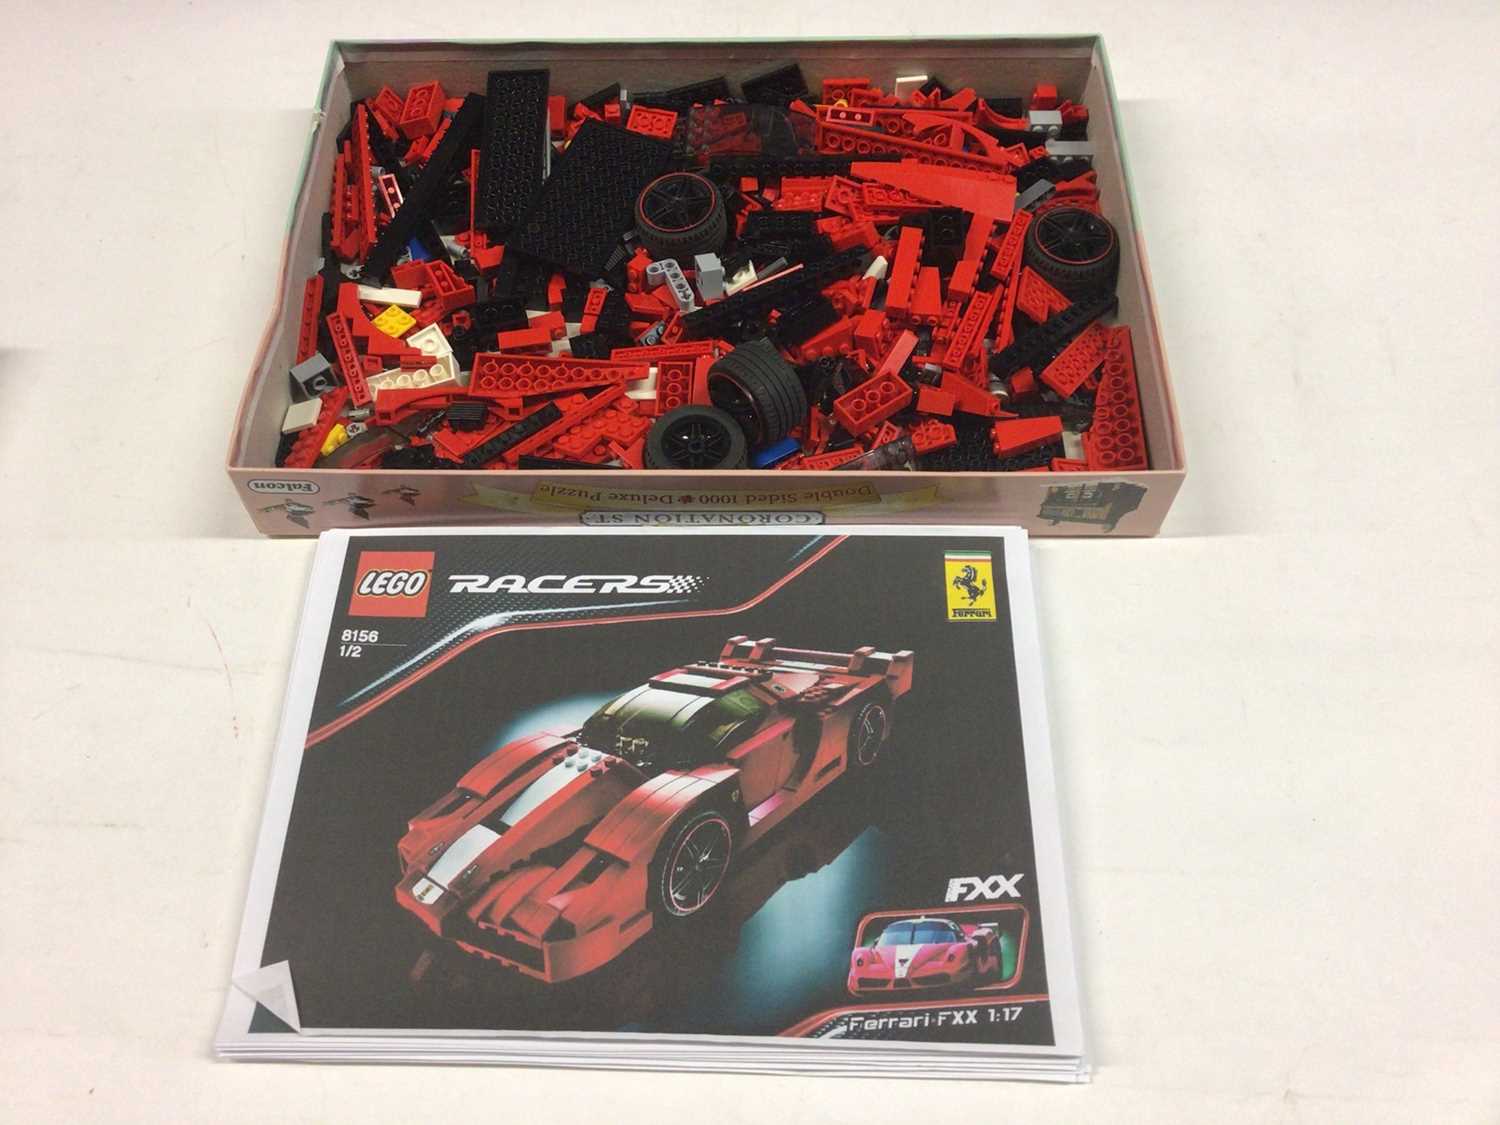 Lot 83 - Lego 8156 Ferrari with printed copy instructions, 8169 Lamborghini, 4896 Roadster, 8853 Excavator with instructions available